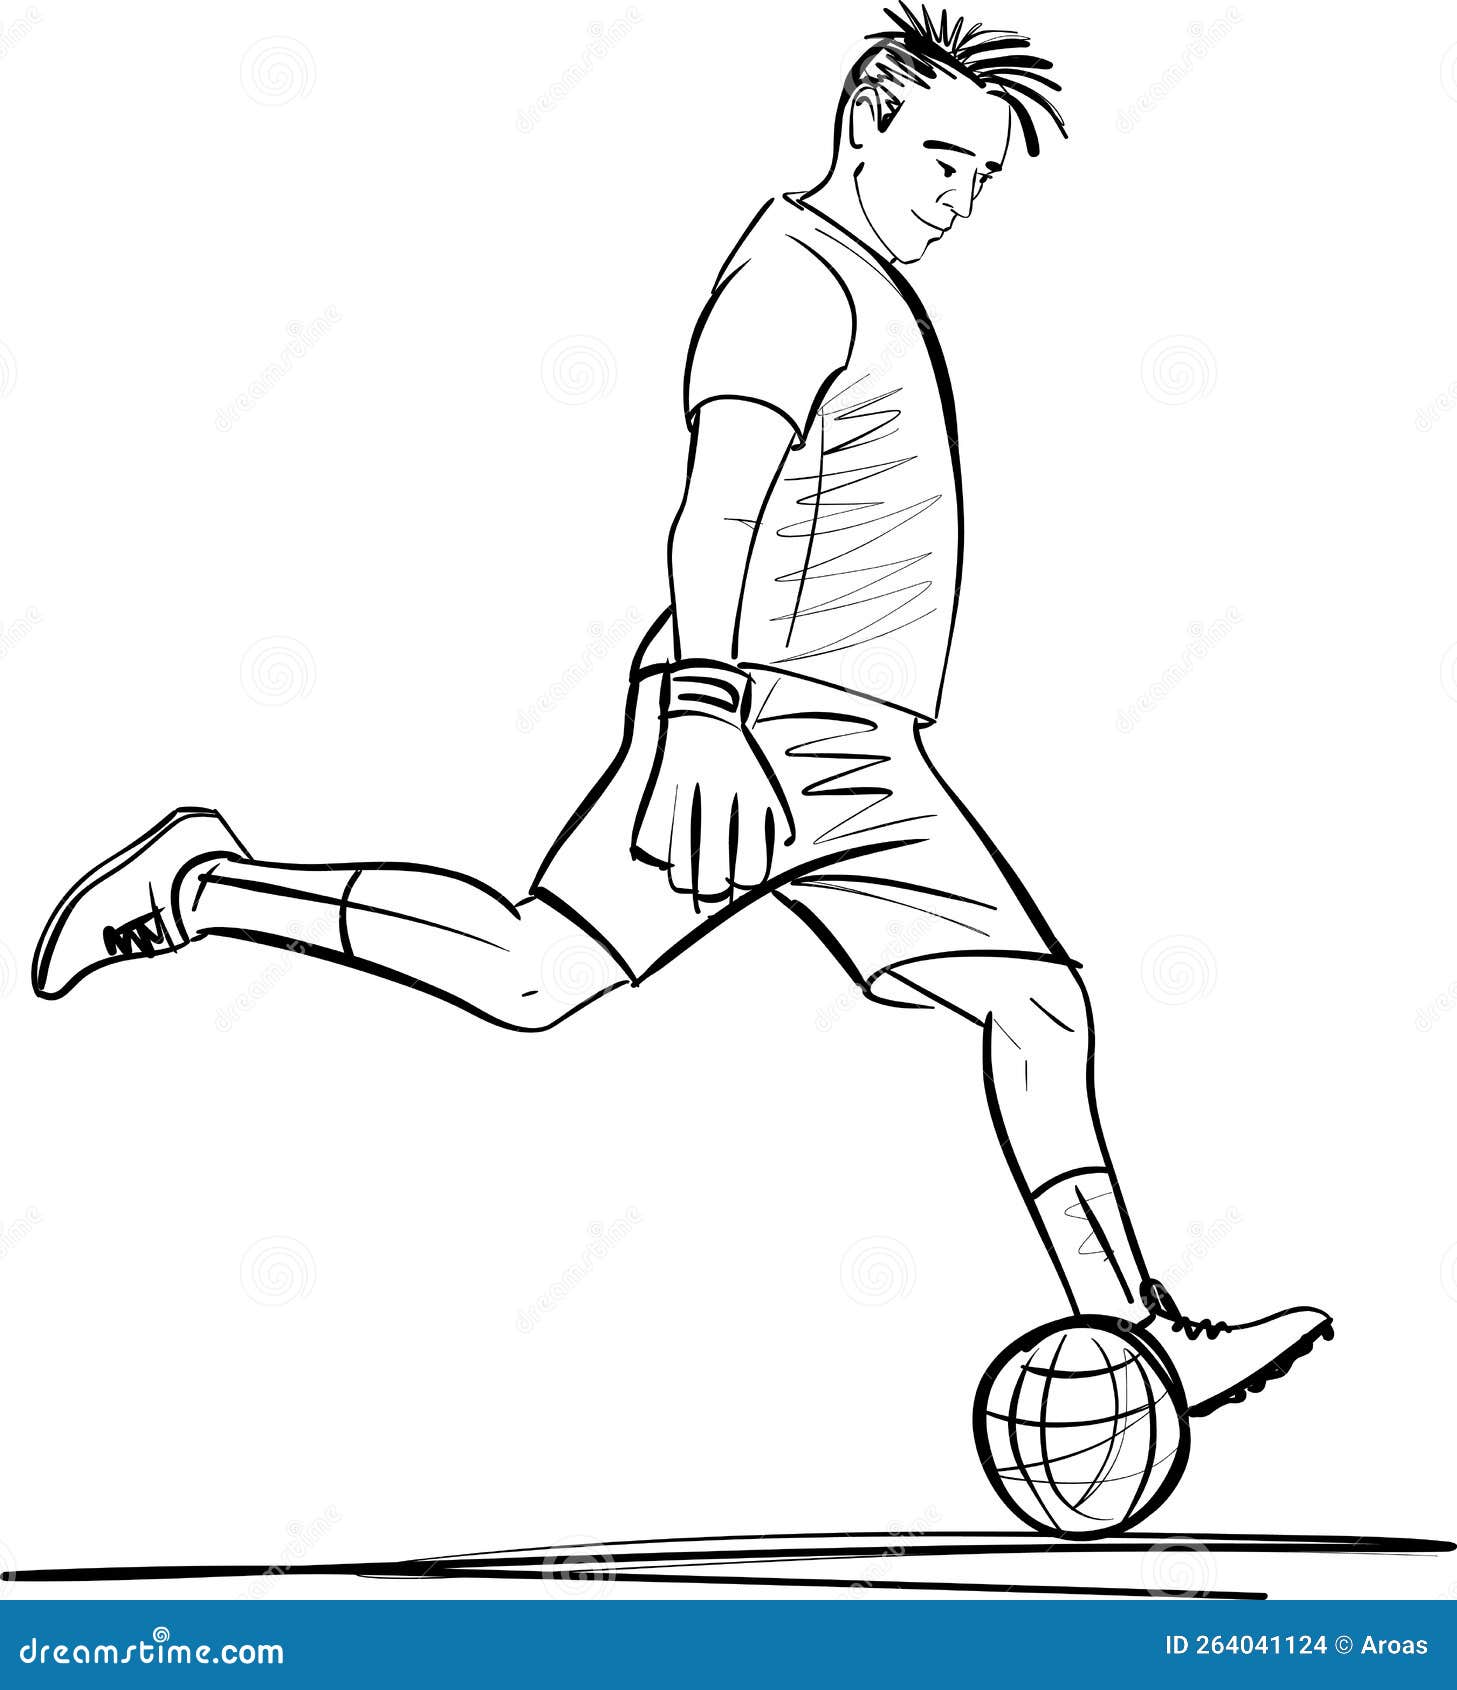 Sketch of Goalkeeper Trying Stop a Shoot Stock Vector - Illustration of ...